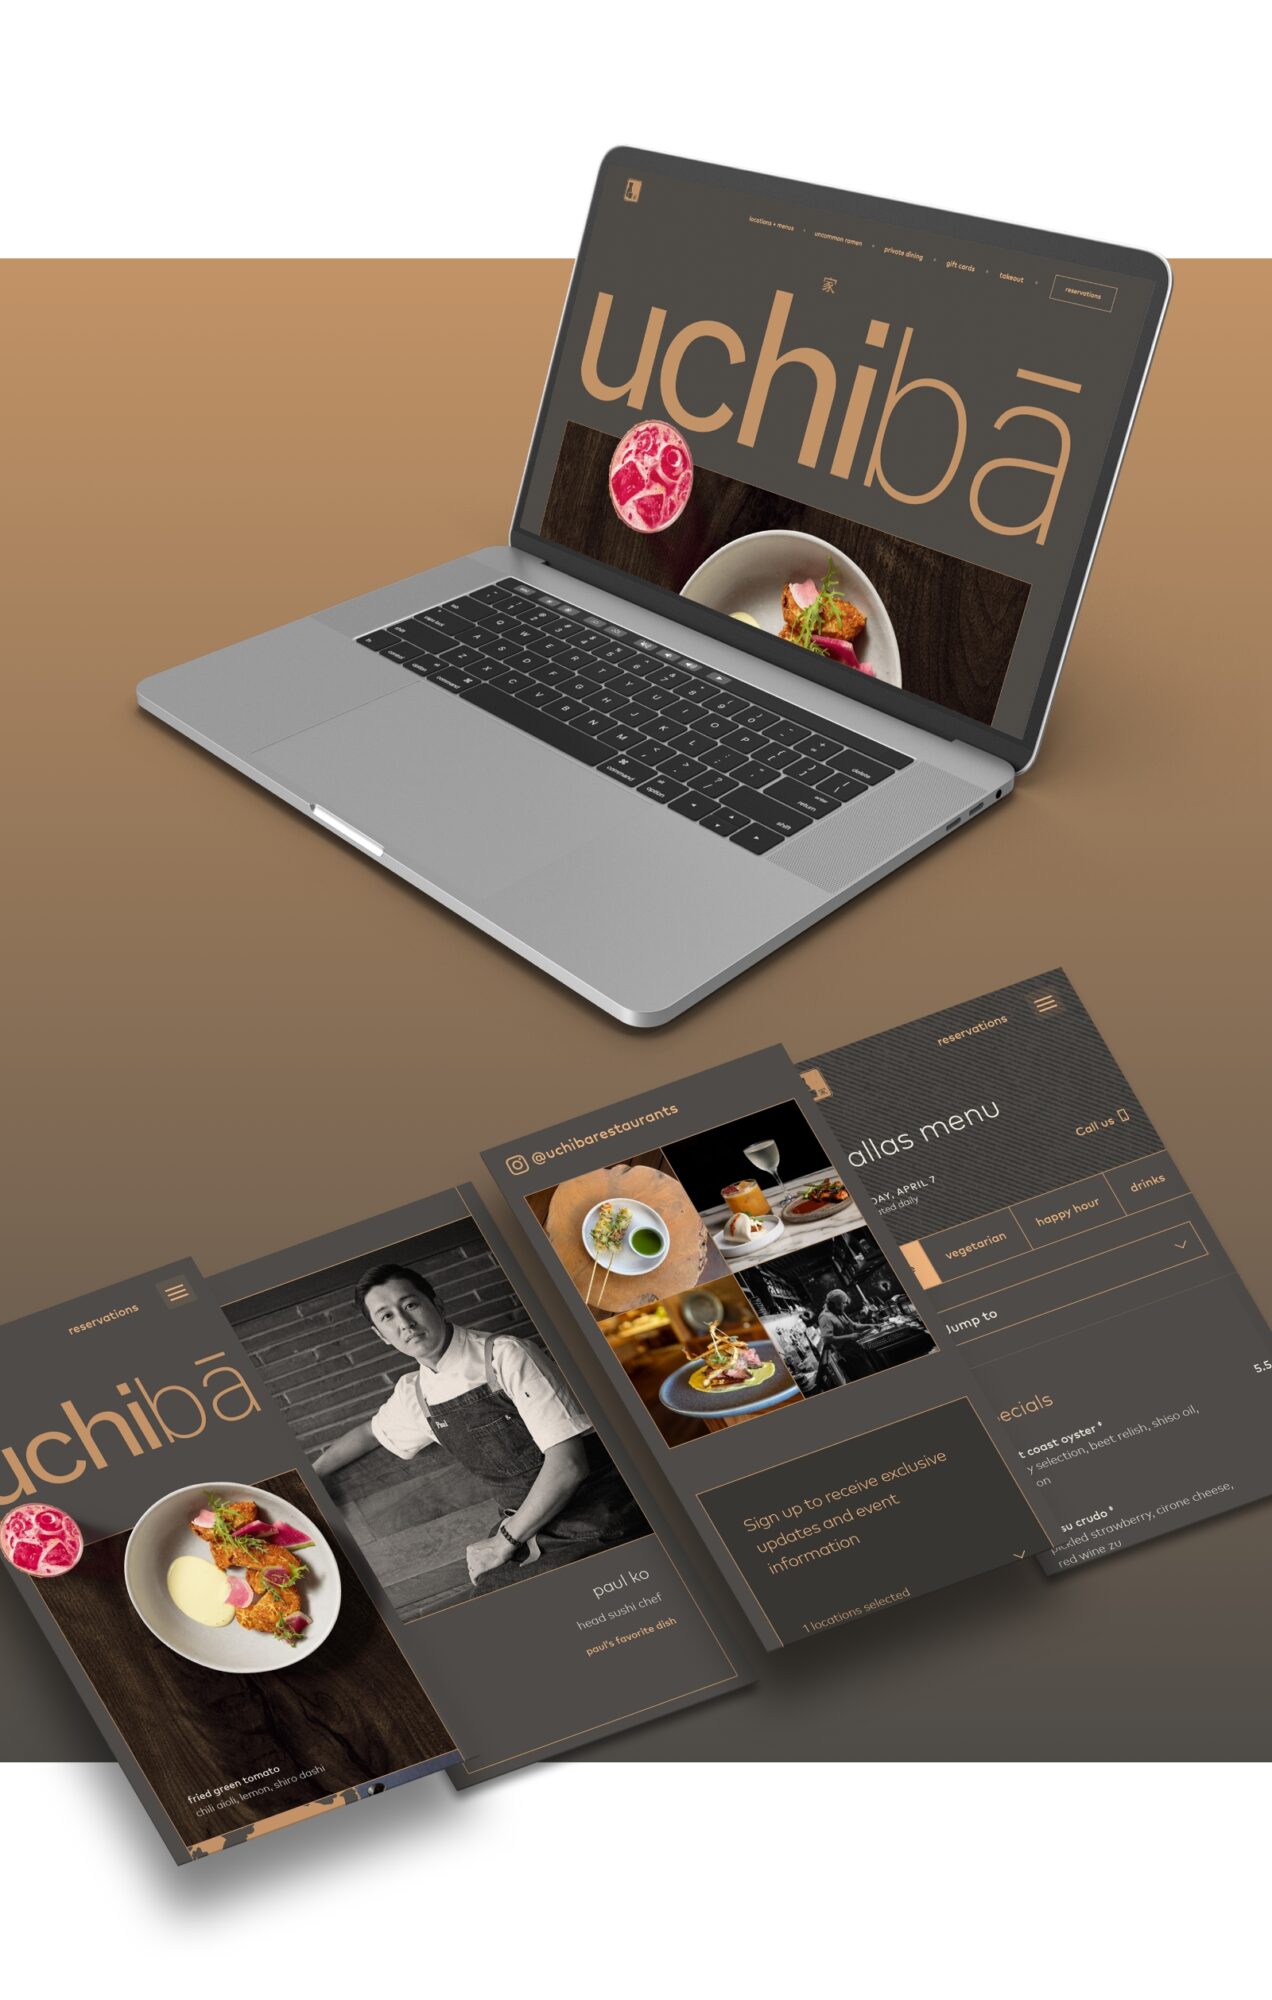 Laptop screenshot of the Uchiba website homepage and smartphone screenshots of four interior pages.